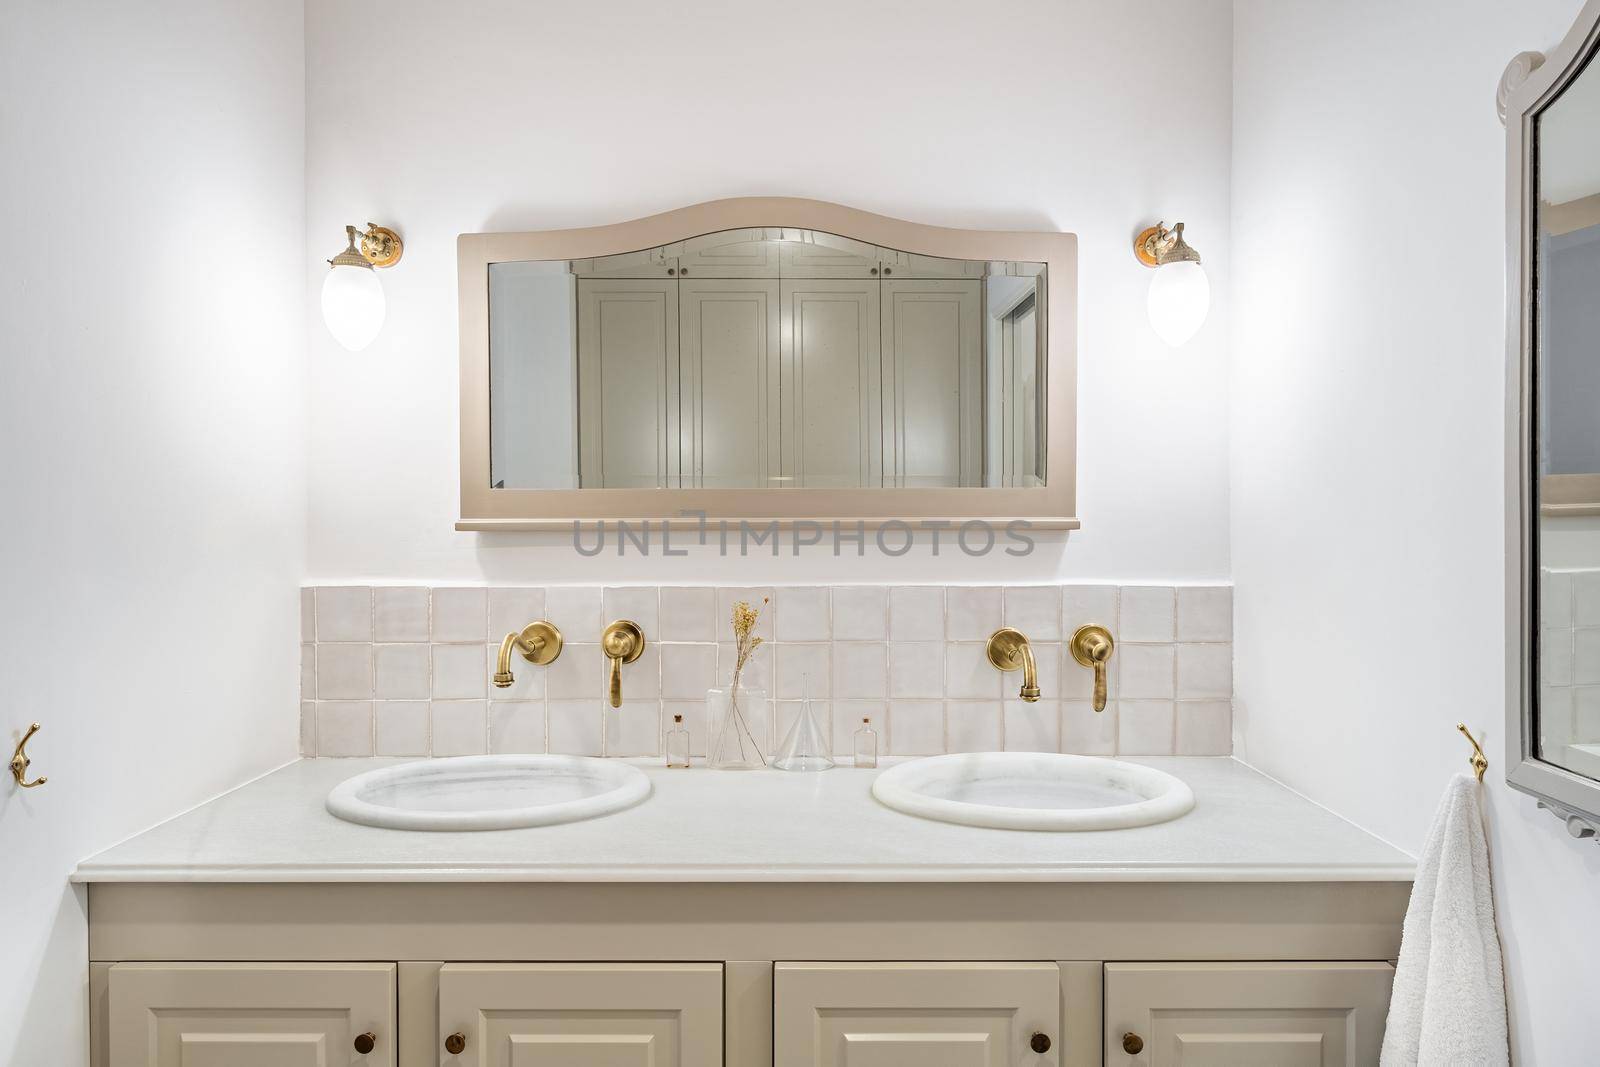 Bathroom decorated in beige color with two sinks, golden faucets and vintage mirror. Interior of retro or classic style. by apavlin